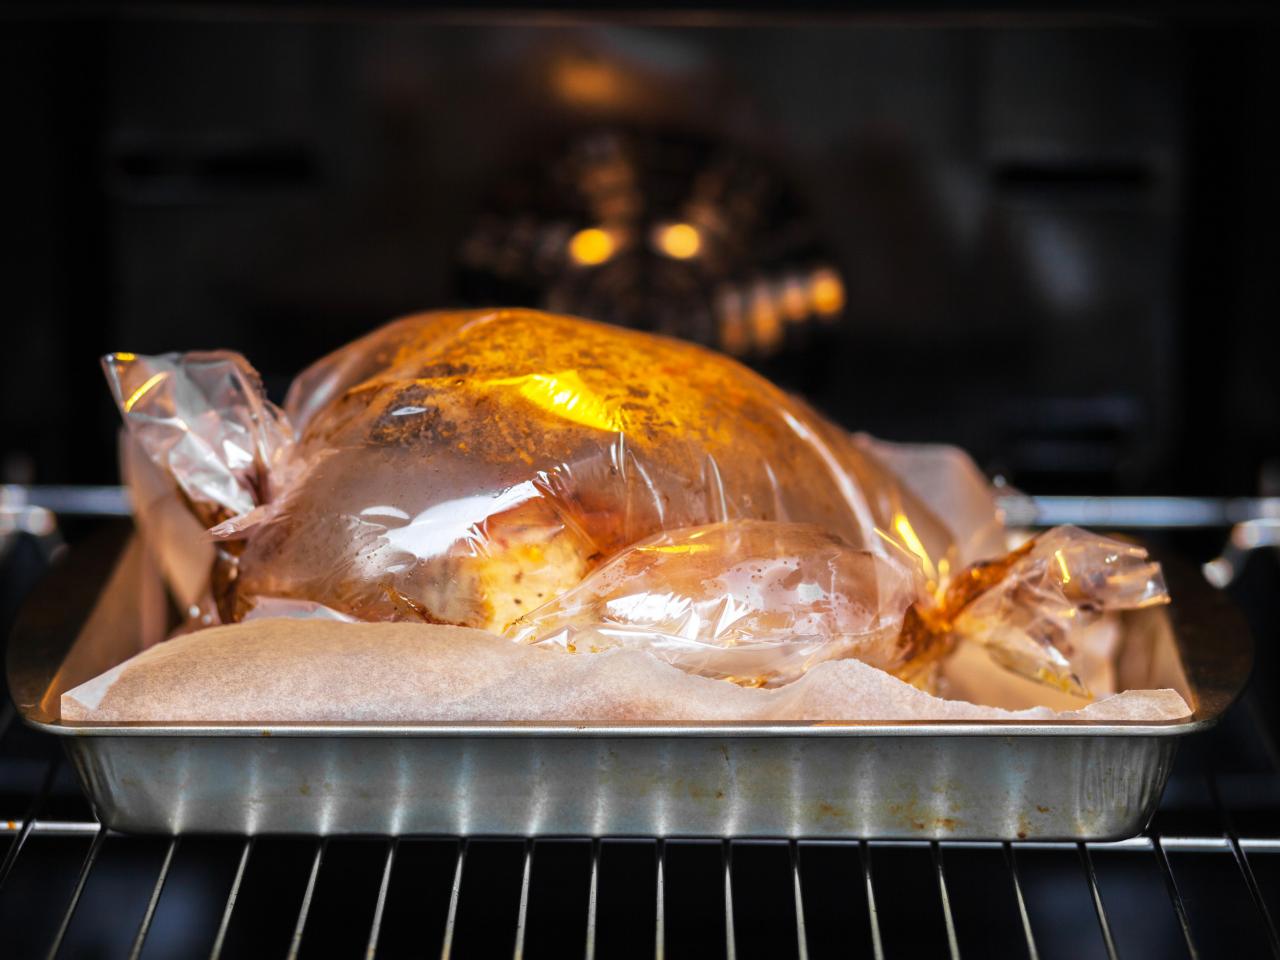 How to Cook a Turkey in a Bag - The Easiest Thanksgiving Turkey